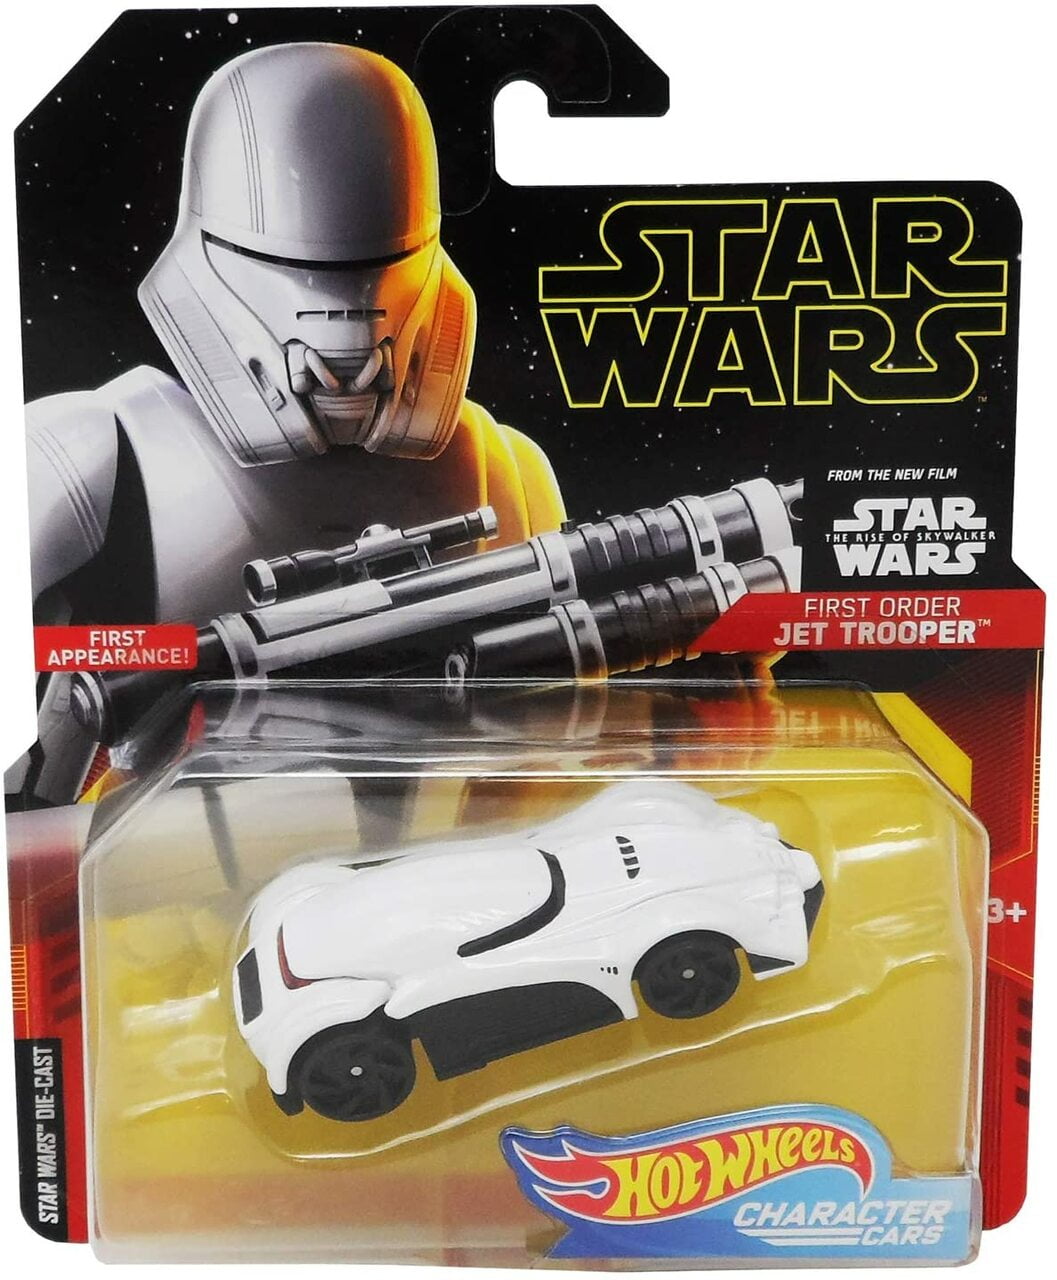 2019 YODA Character Cars! 40th The Empire Strikes Back Details about   Hot Wheels Star Wars 